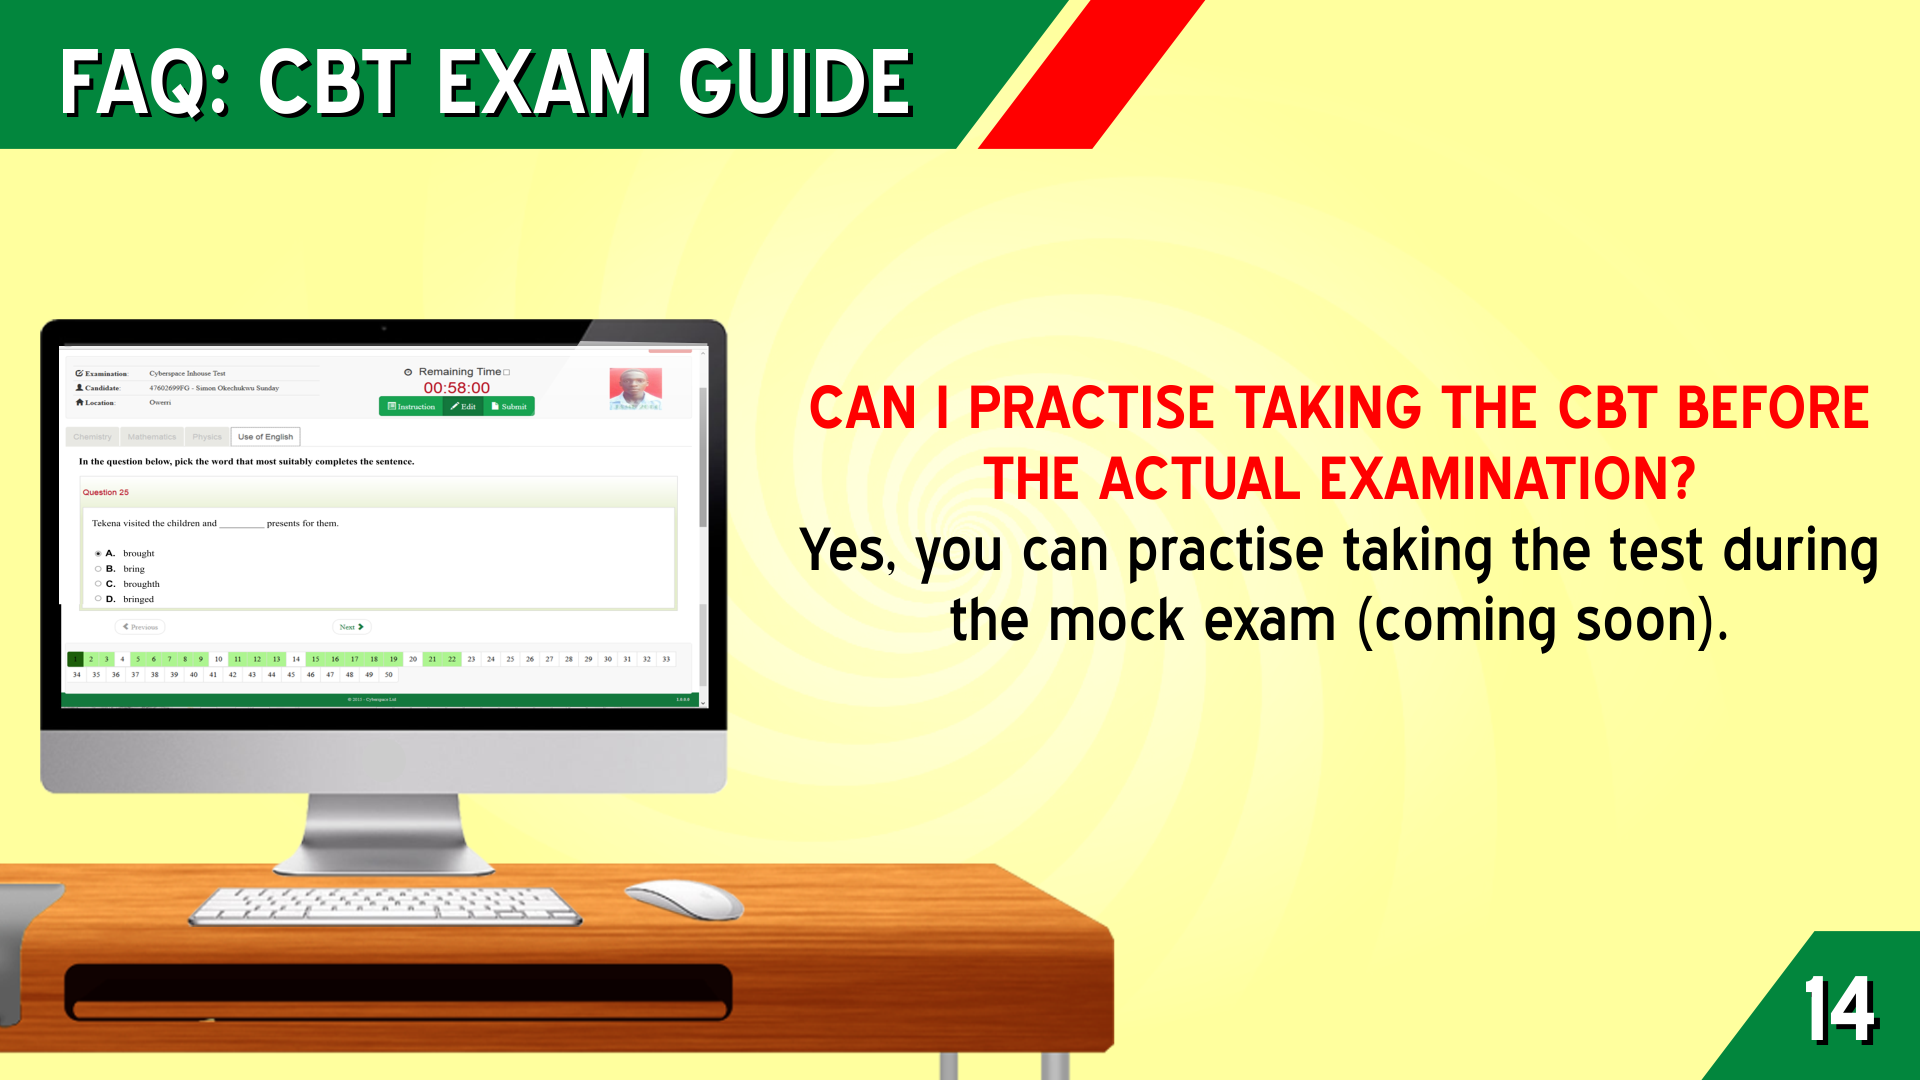 CAN I PRACTICE TAKING THE CBT BEFORE THE ACTUAL EXAMINATION?